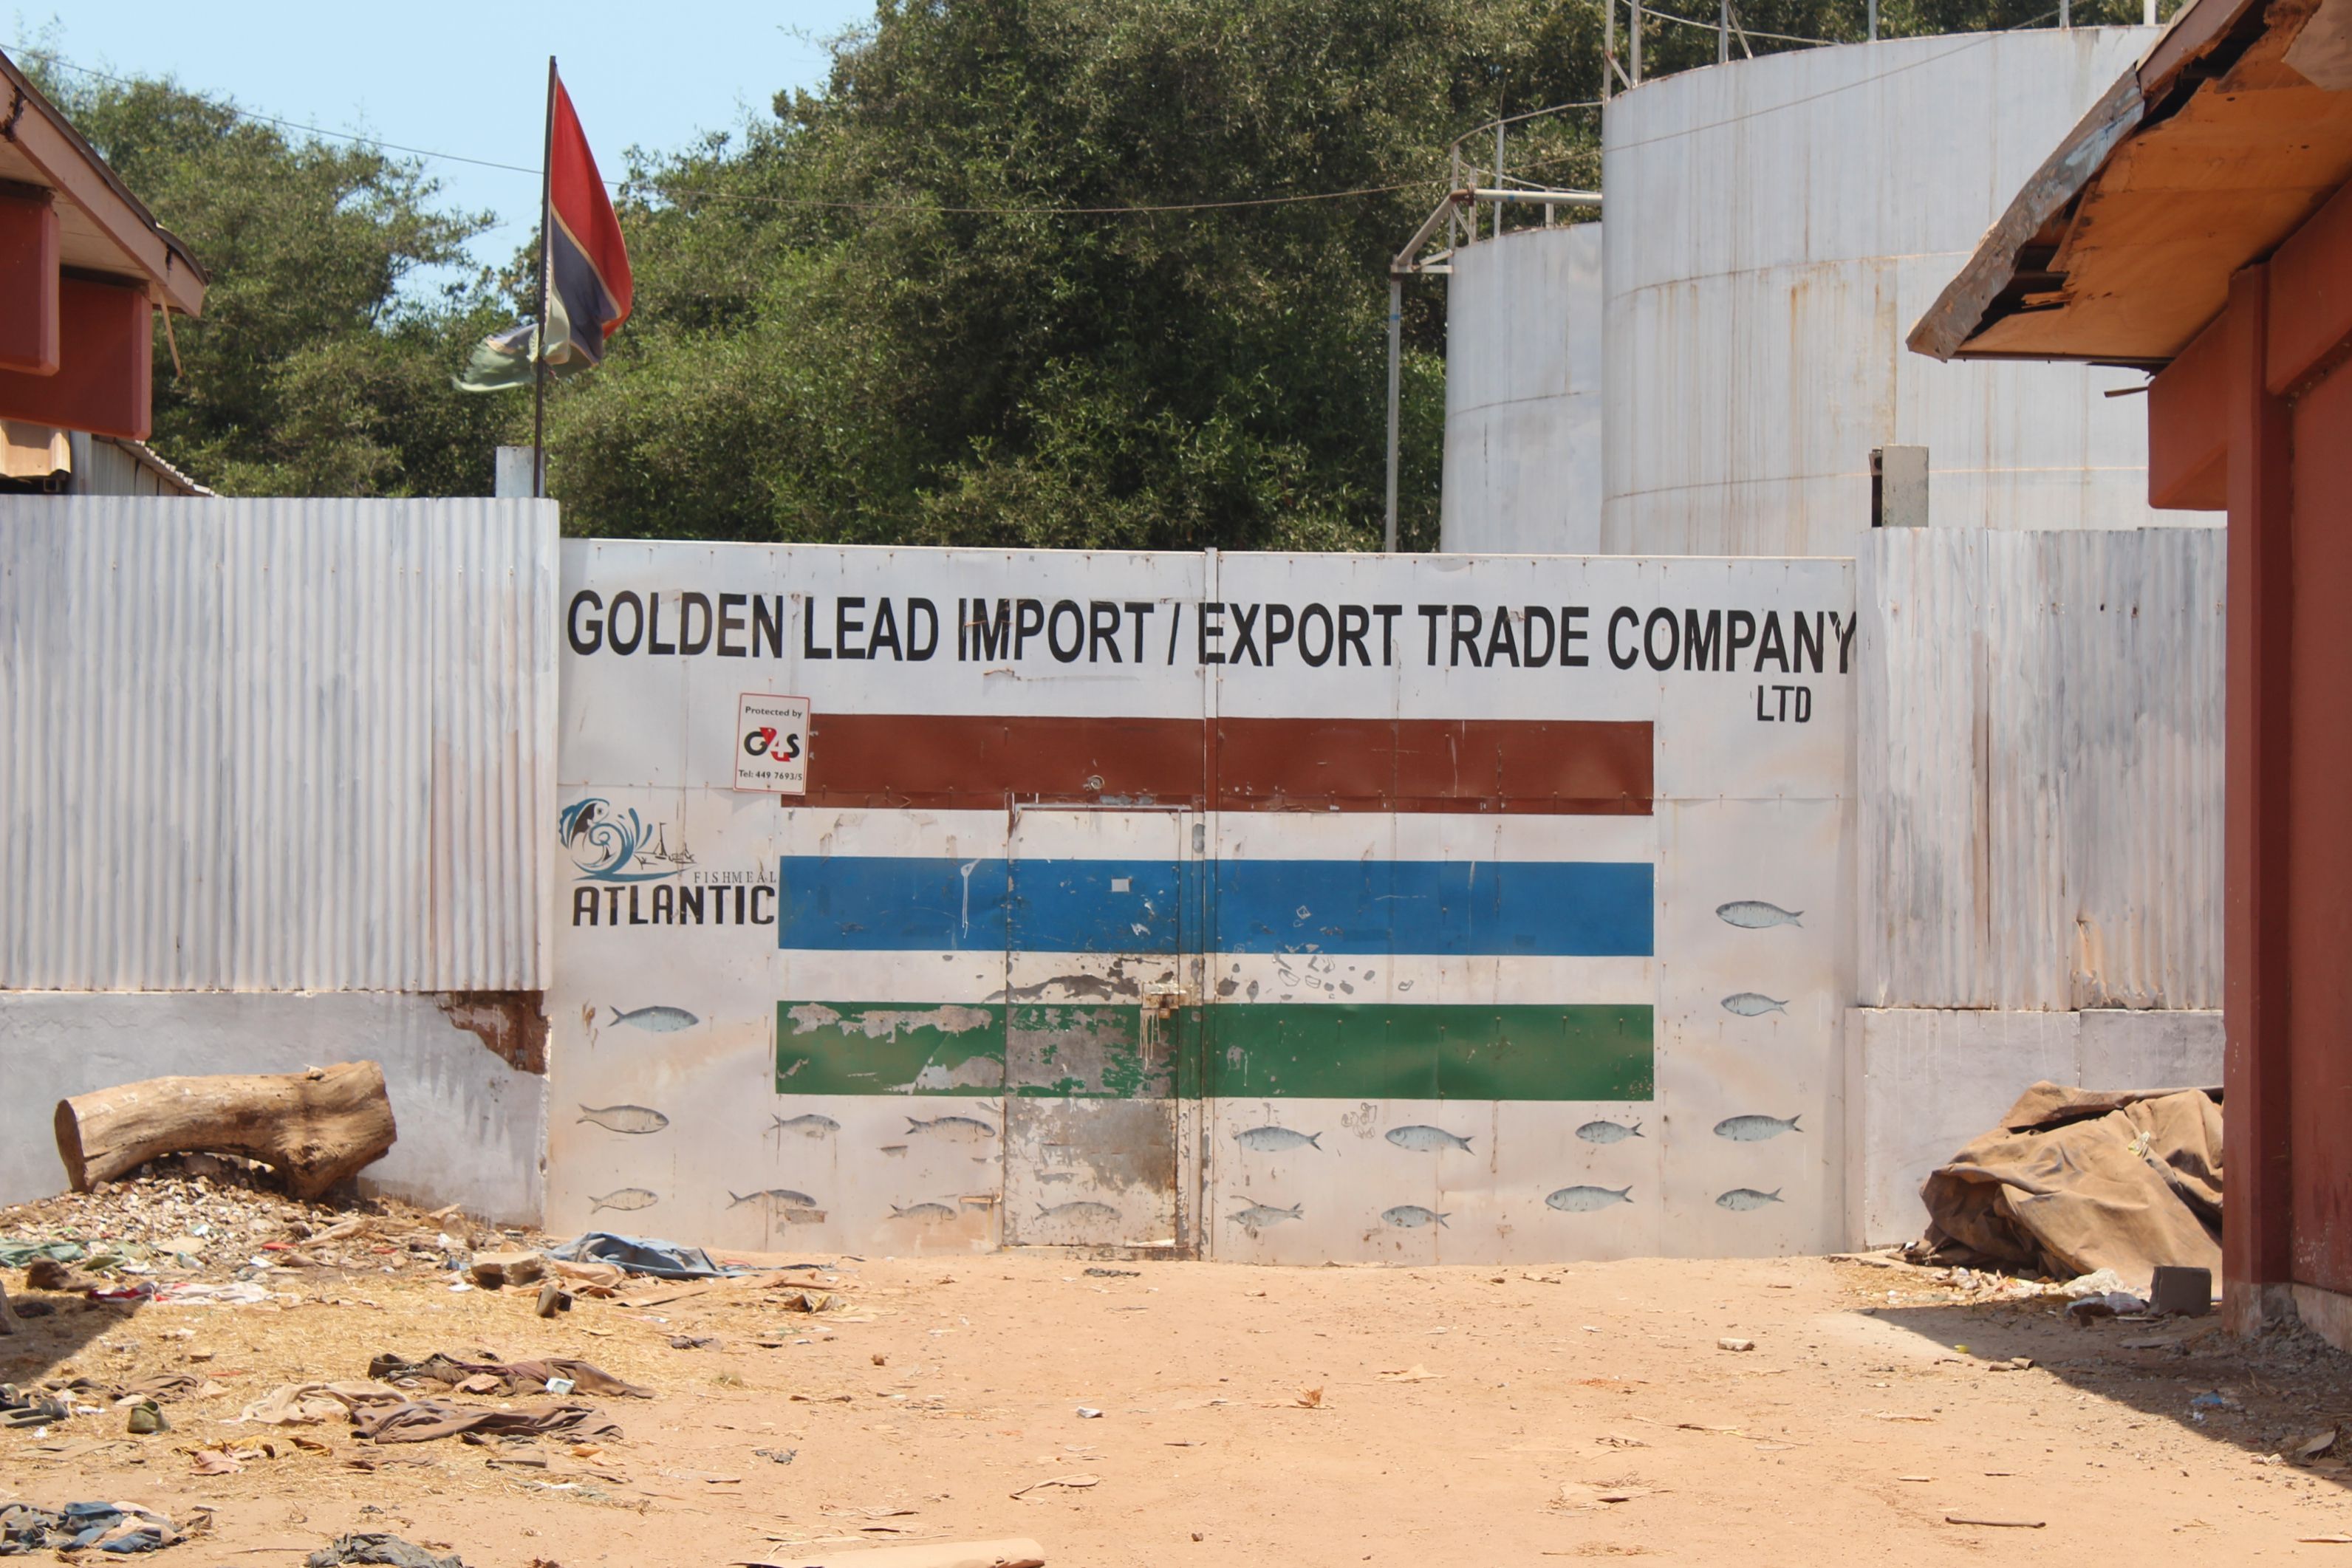 Golden Lead has faced repeated clashes with locals who accuse the factory of pollution and unfair competition. Image by Nosmot Gbadamosi. The Gambia, 2018.